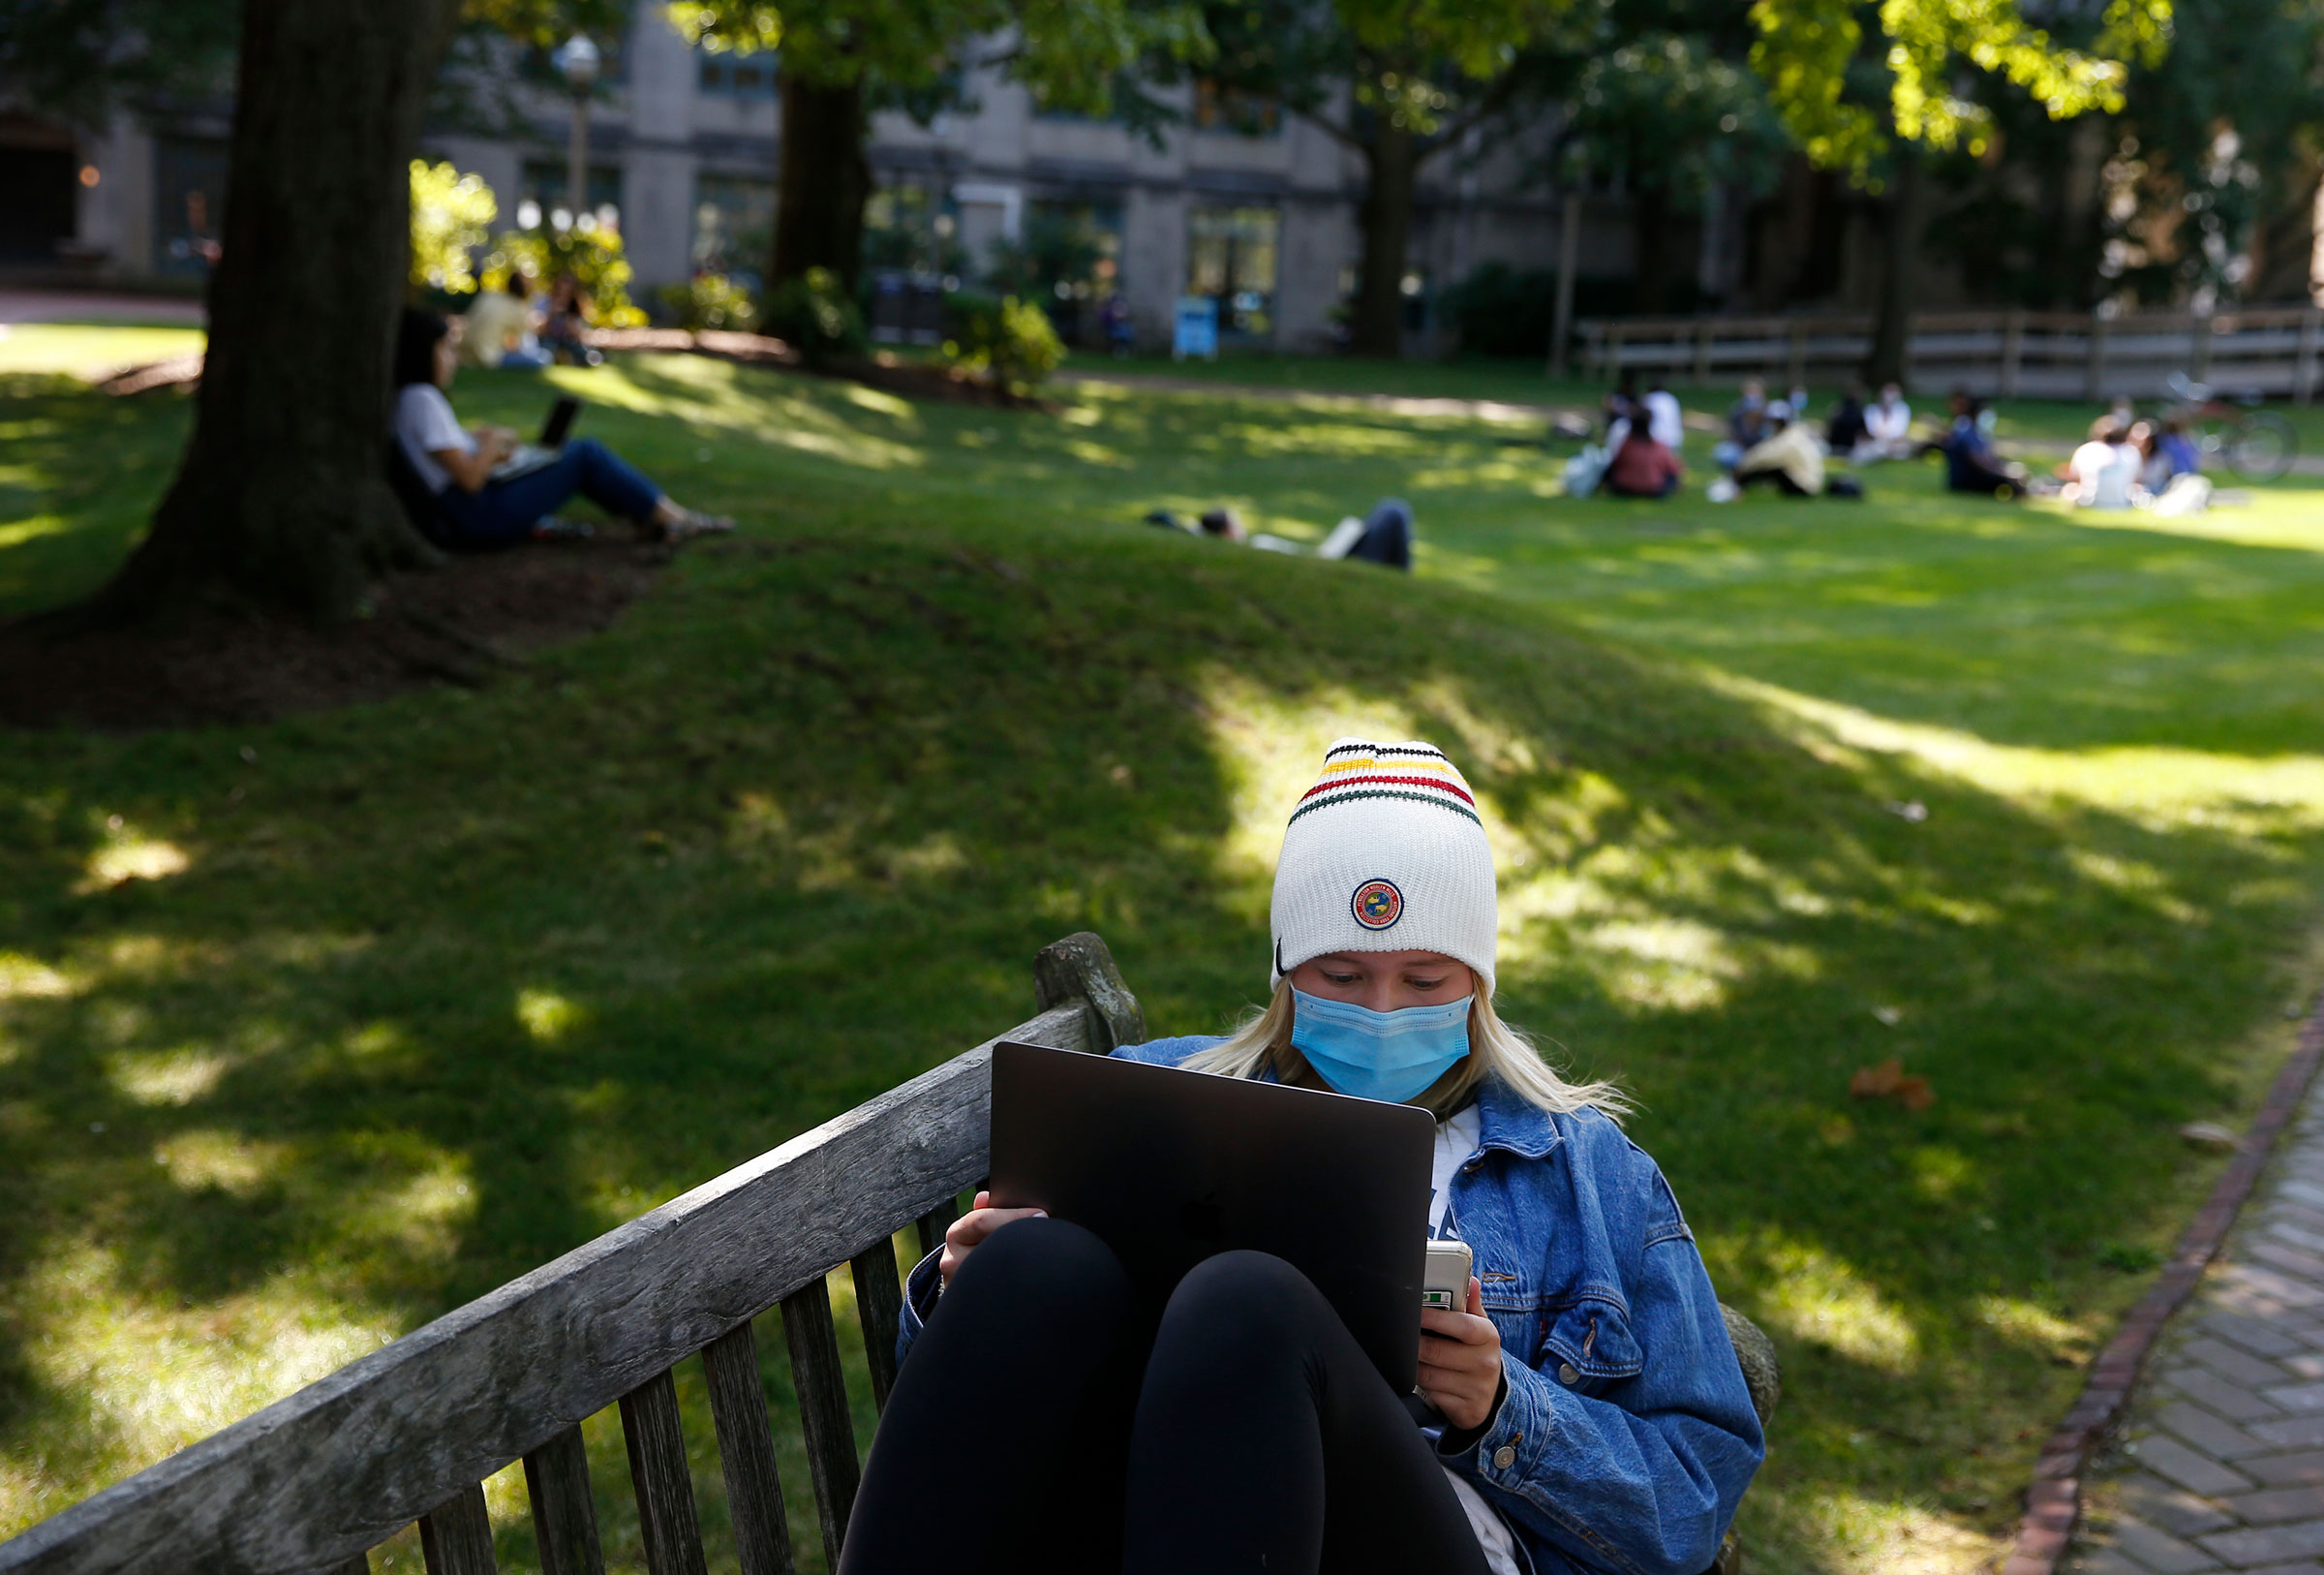 A student wears a mask to protect against the spread of COVID-19 as she worked on her laptop outside at Boston University, on Sept. 23, 2020.